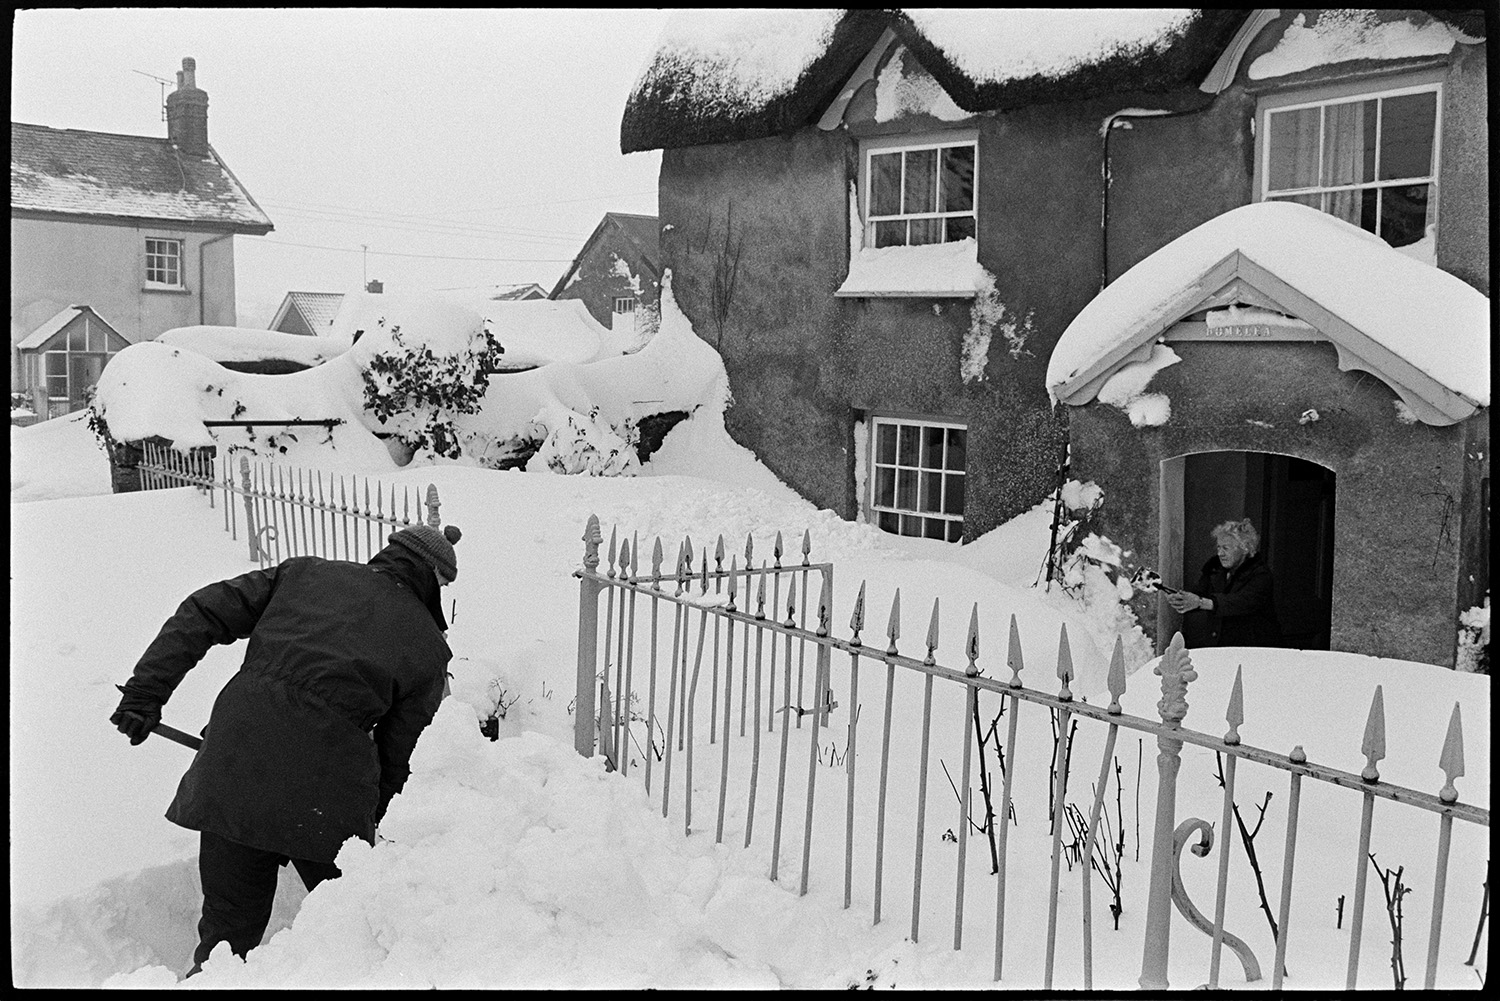 Snow, snowdrifts in village after blizzard, cars, people shovelling, telephone kiosk. 
[Derek Marden shovelling snow outside Homelea cottage in Dolton. A woman is shovelling snow by the porch of the cottage. The snowdrifts are against the railings and ground floor windows of the cottage.]